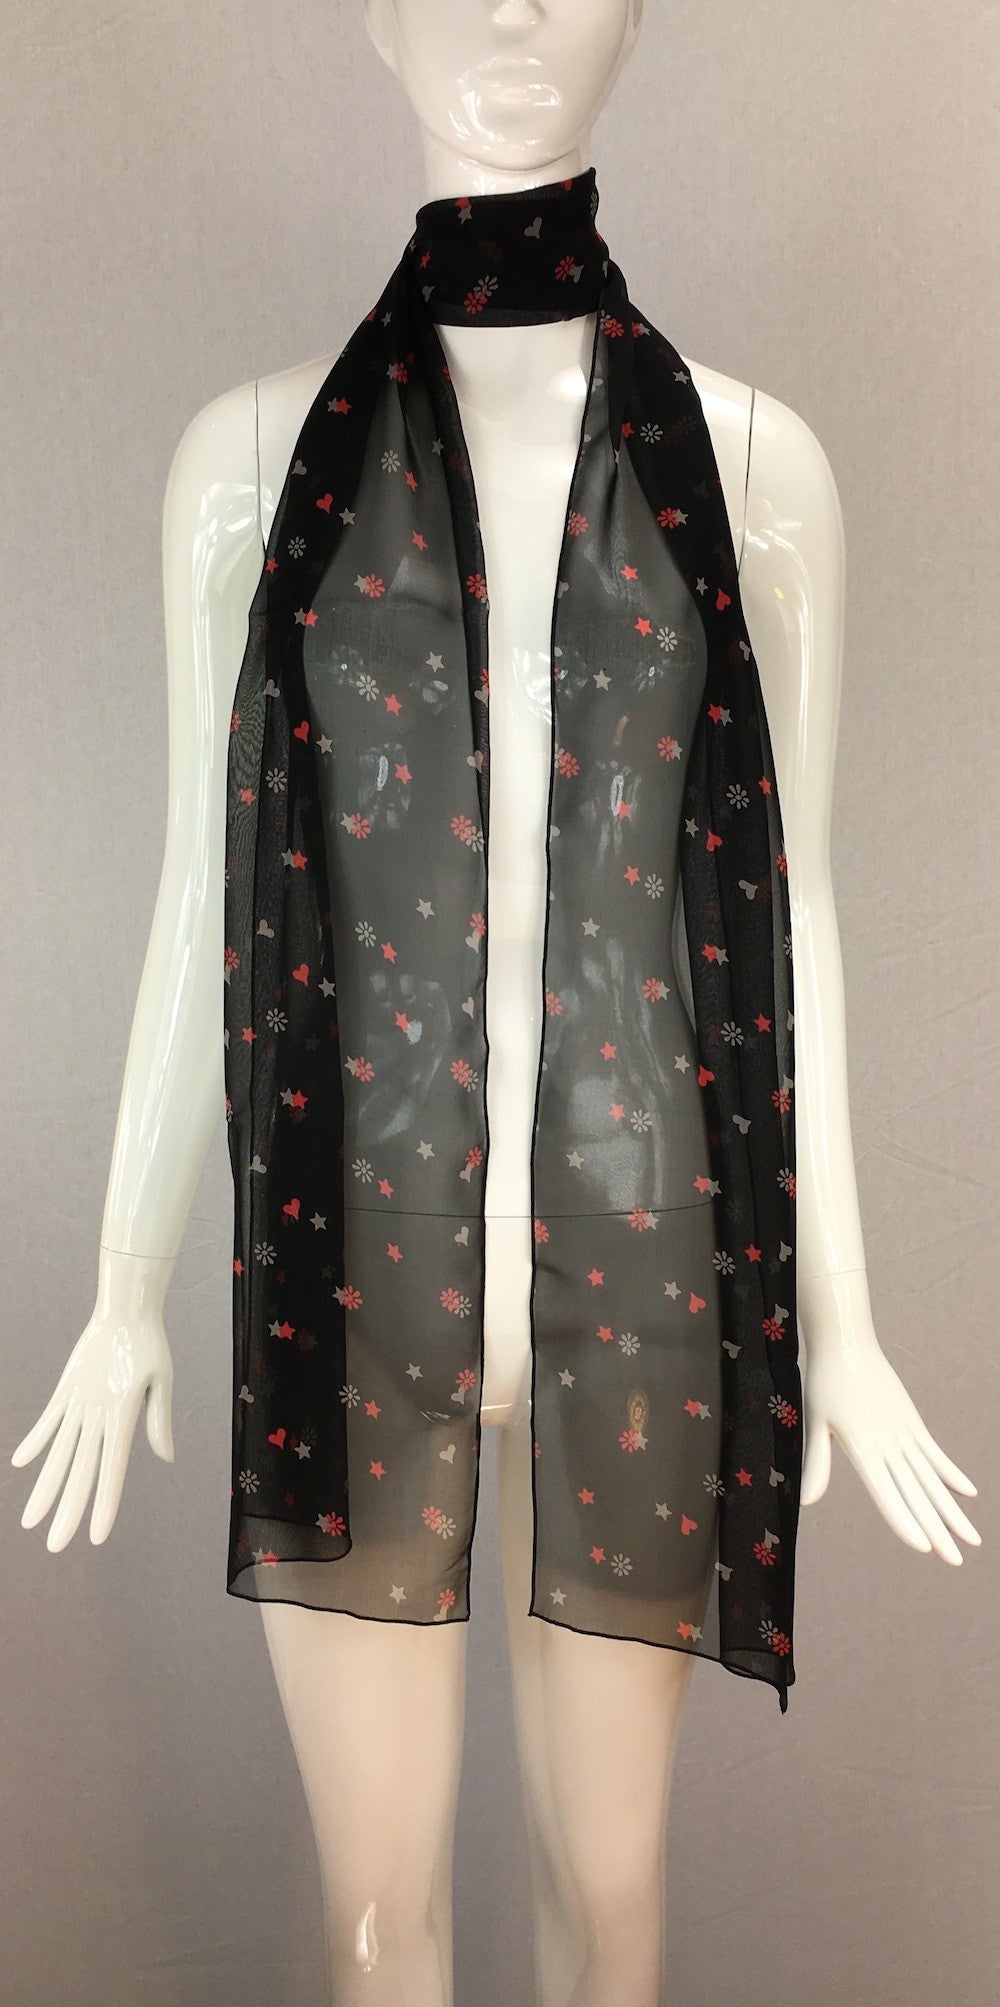 Janet Deleuse Designer Silk Scarf with Hearts, SOLD